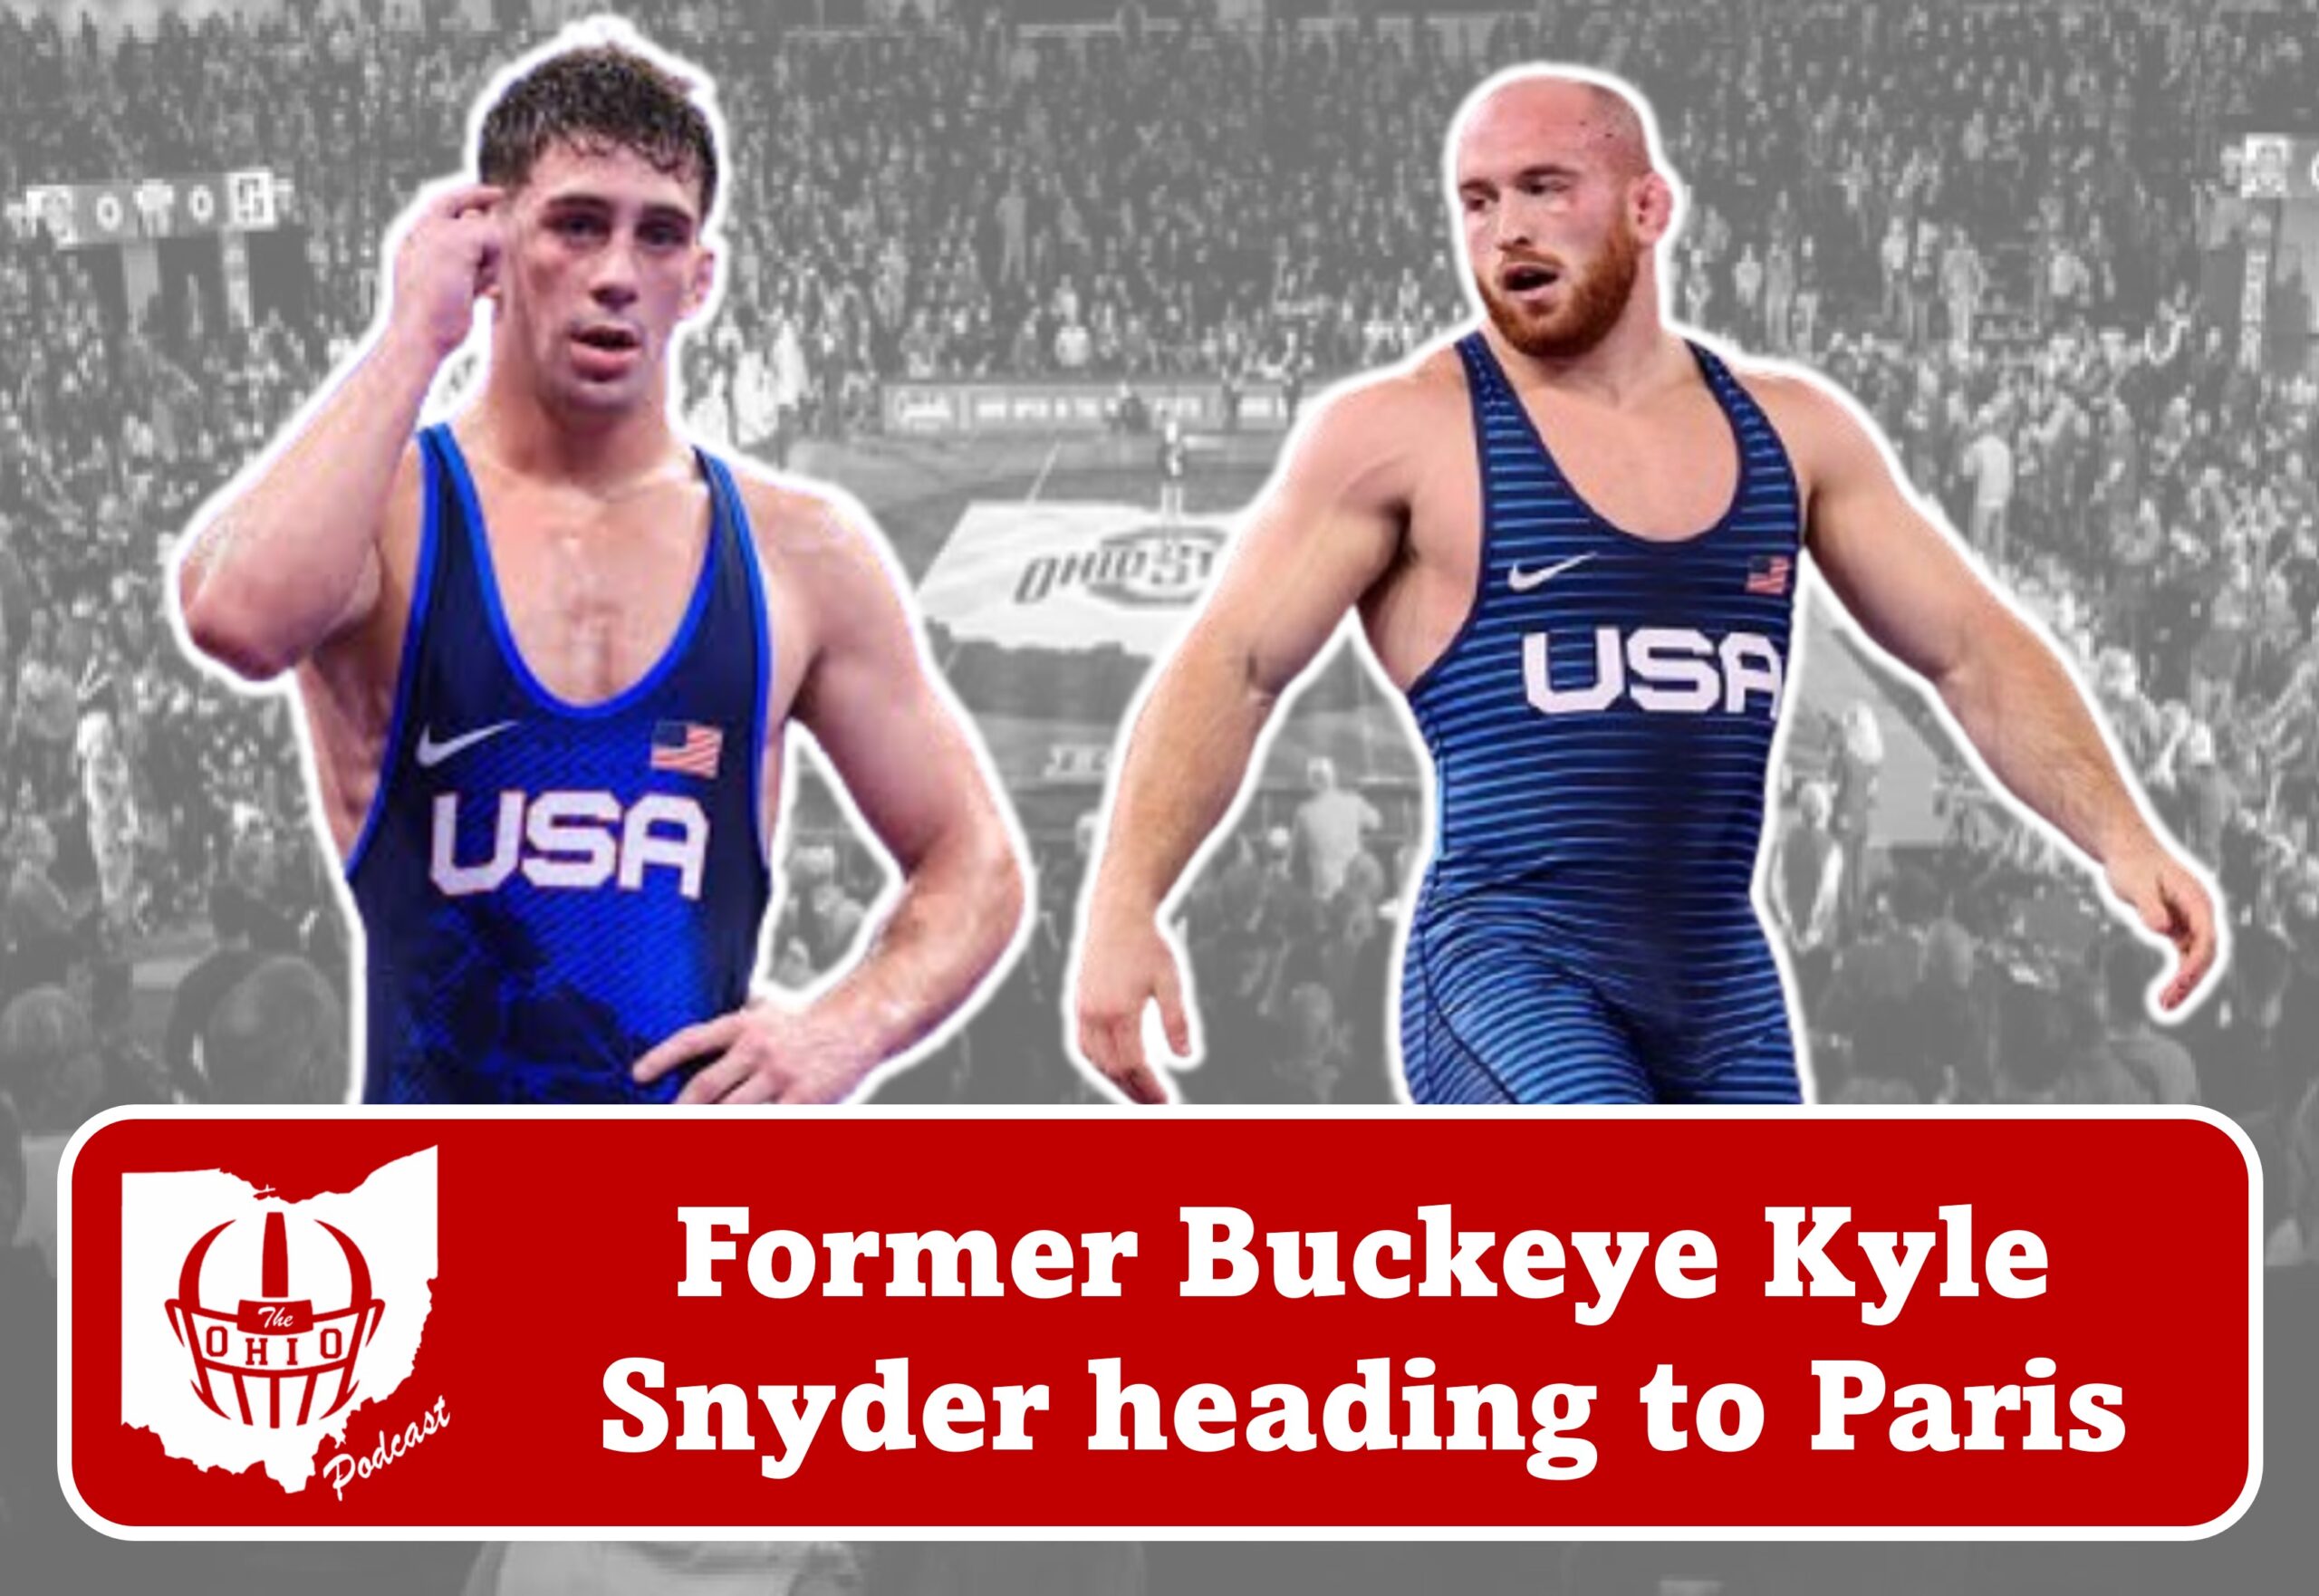 Former Buckeye Kyle Snyder is Heading to Paris